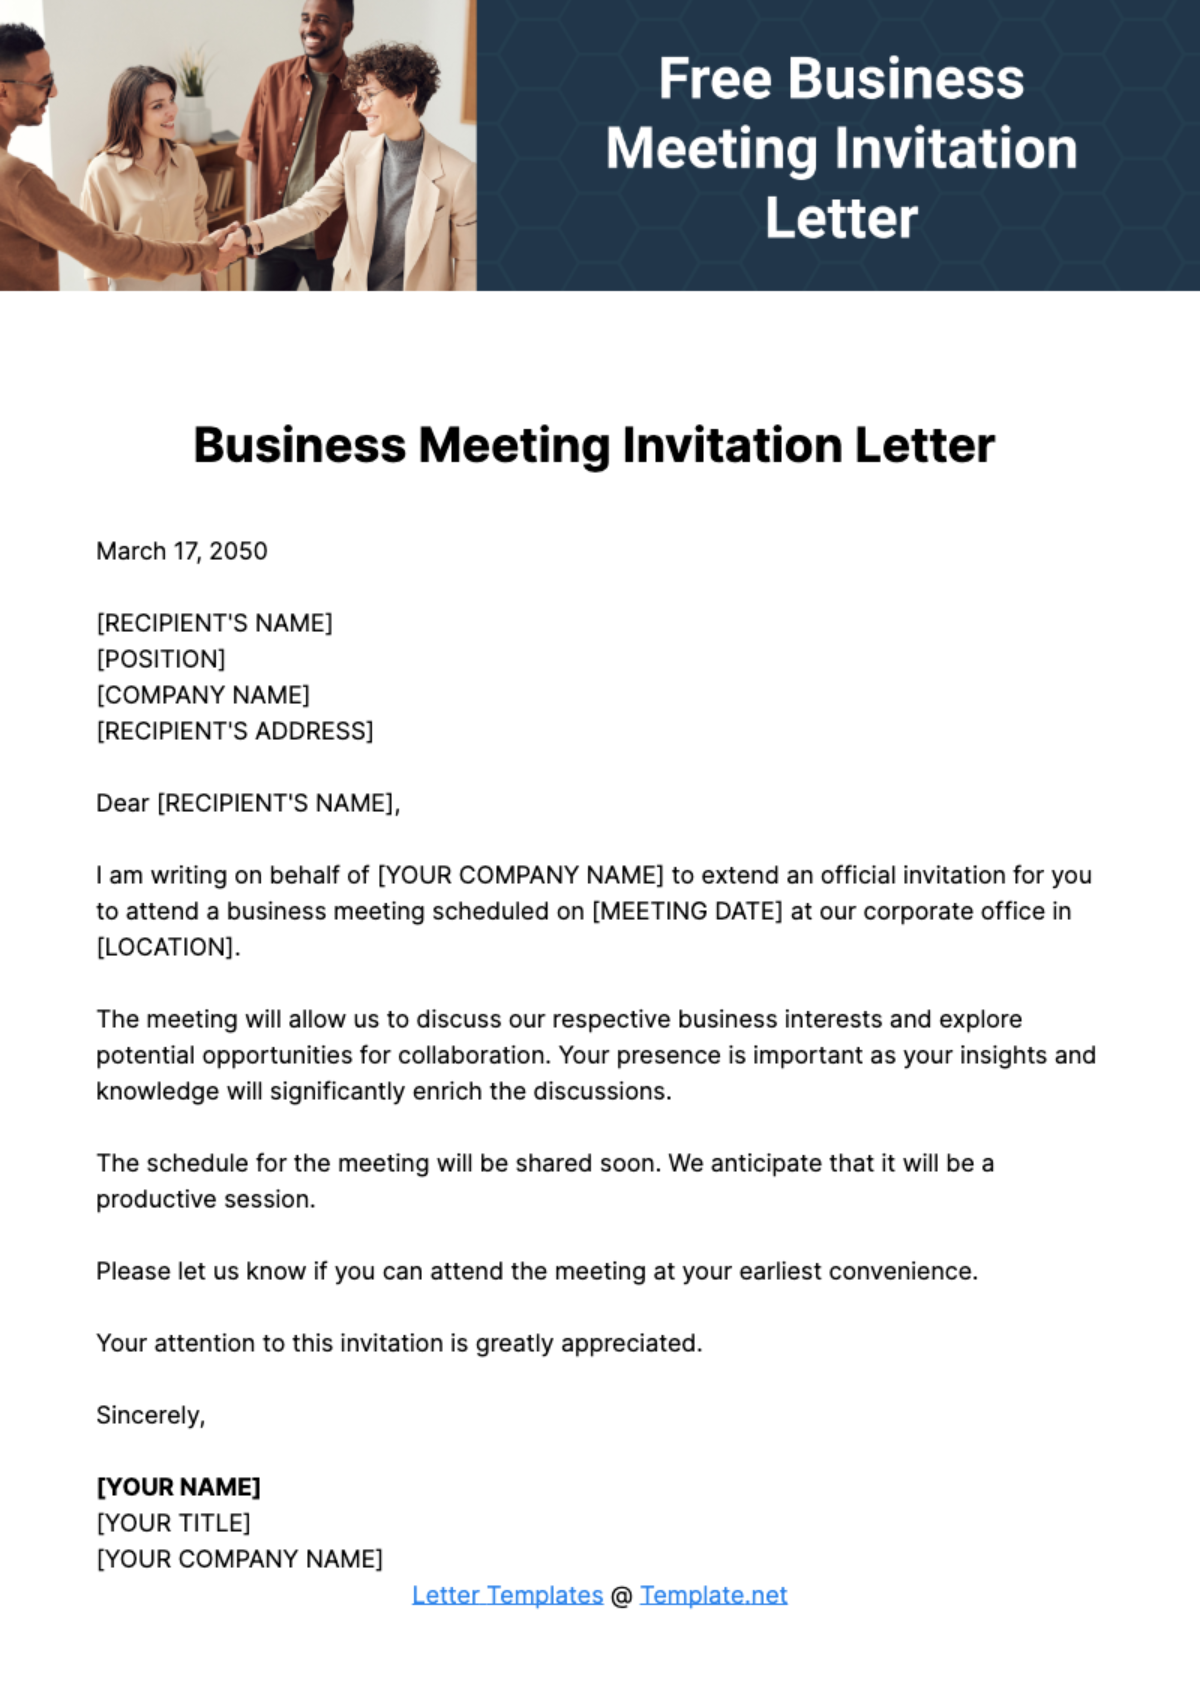 Free Business Meeting Invitation Letter Template